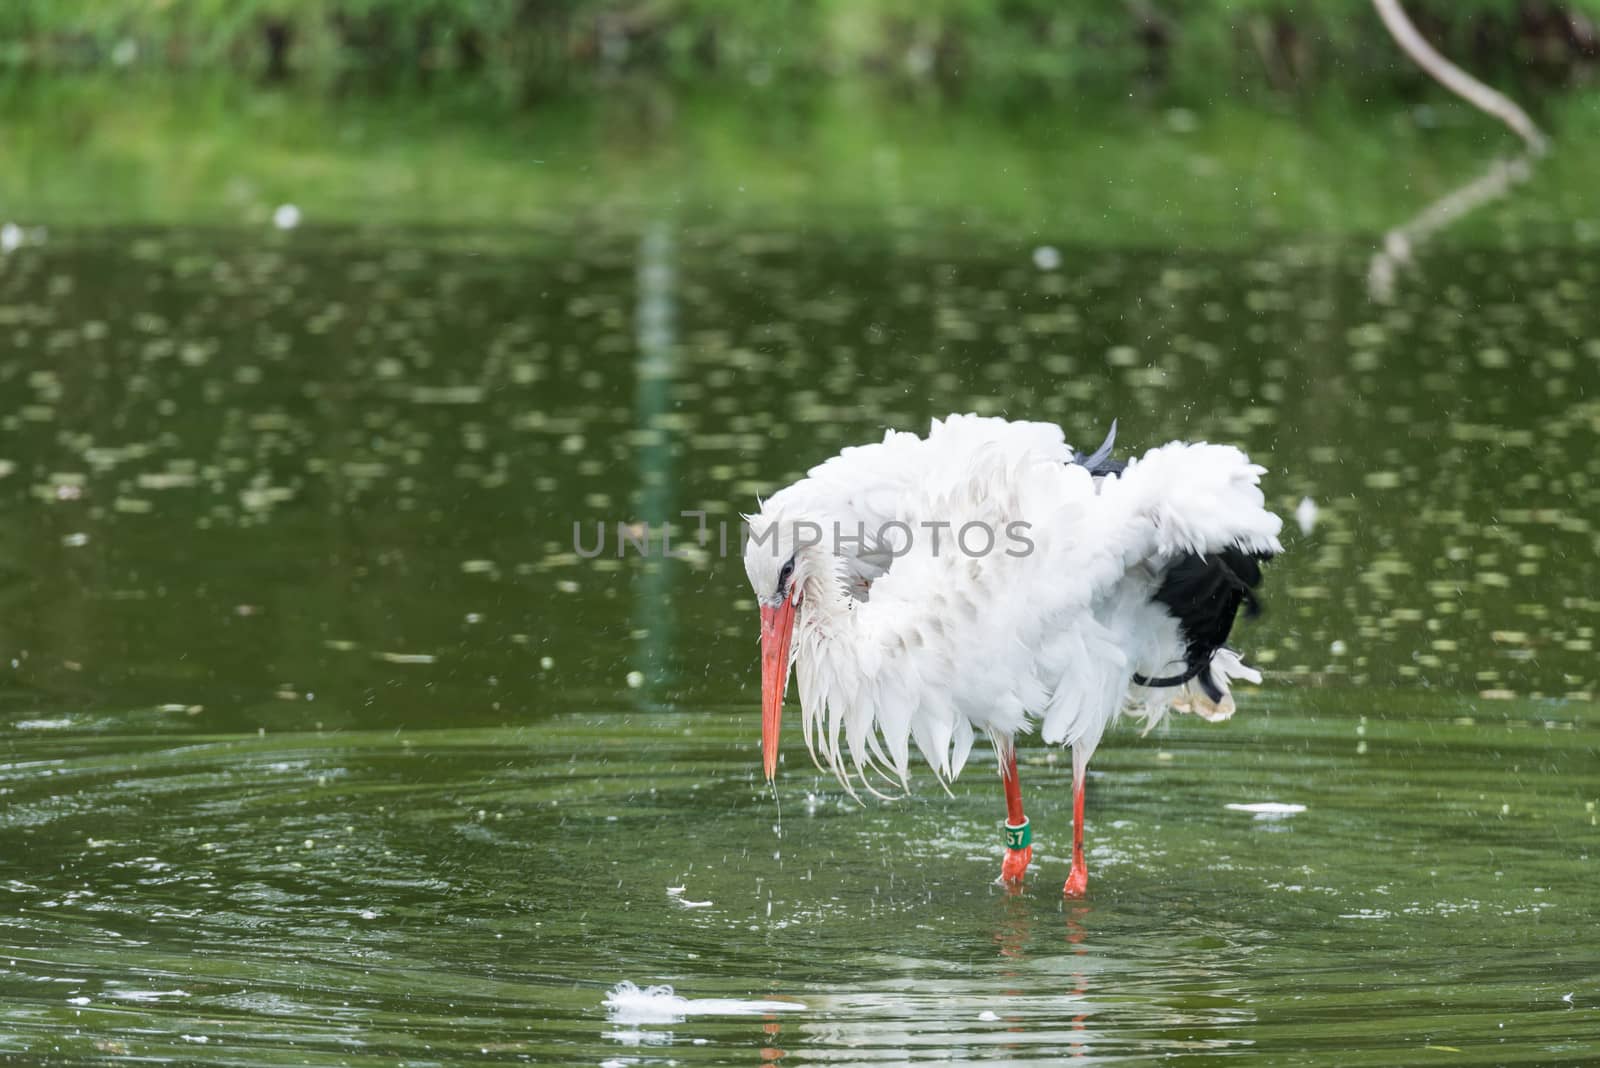 Big mouth bird standing in water in a zoo